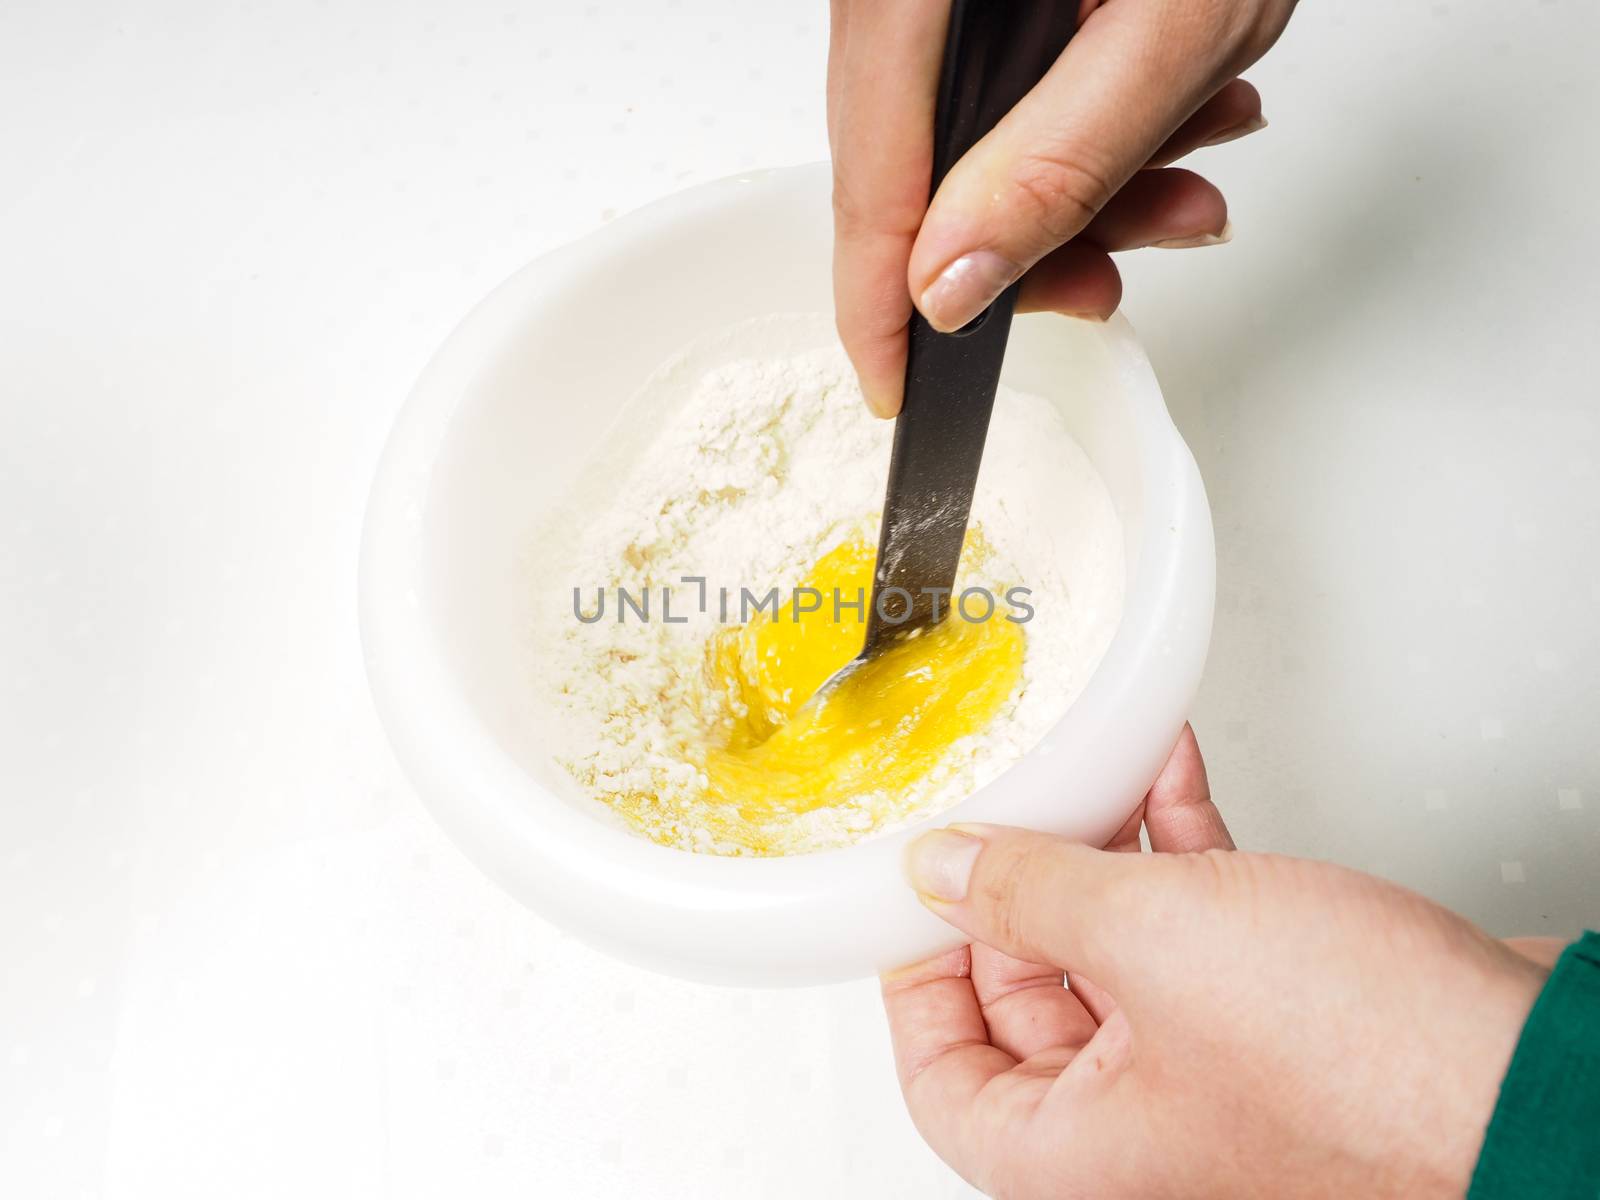 Female person blending flour with egg yolk and melted butter with a black spatula in plastic bowl